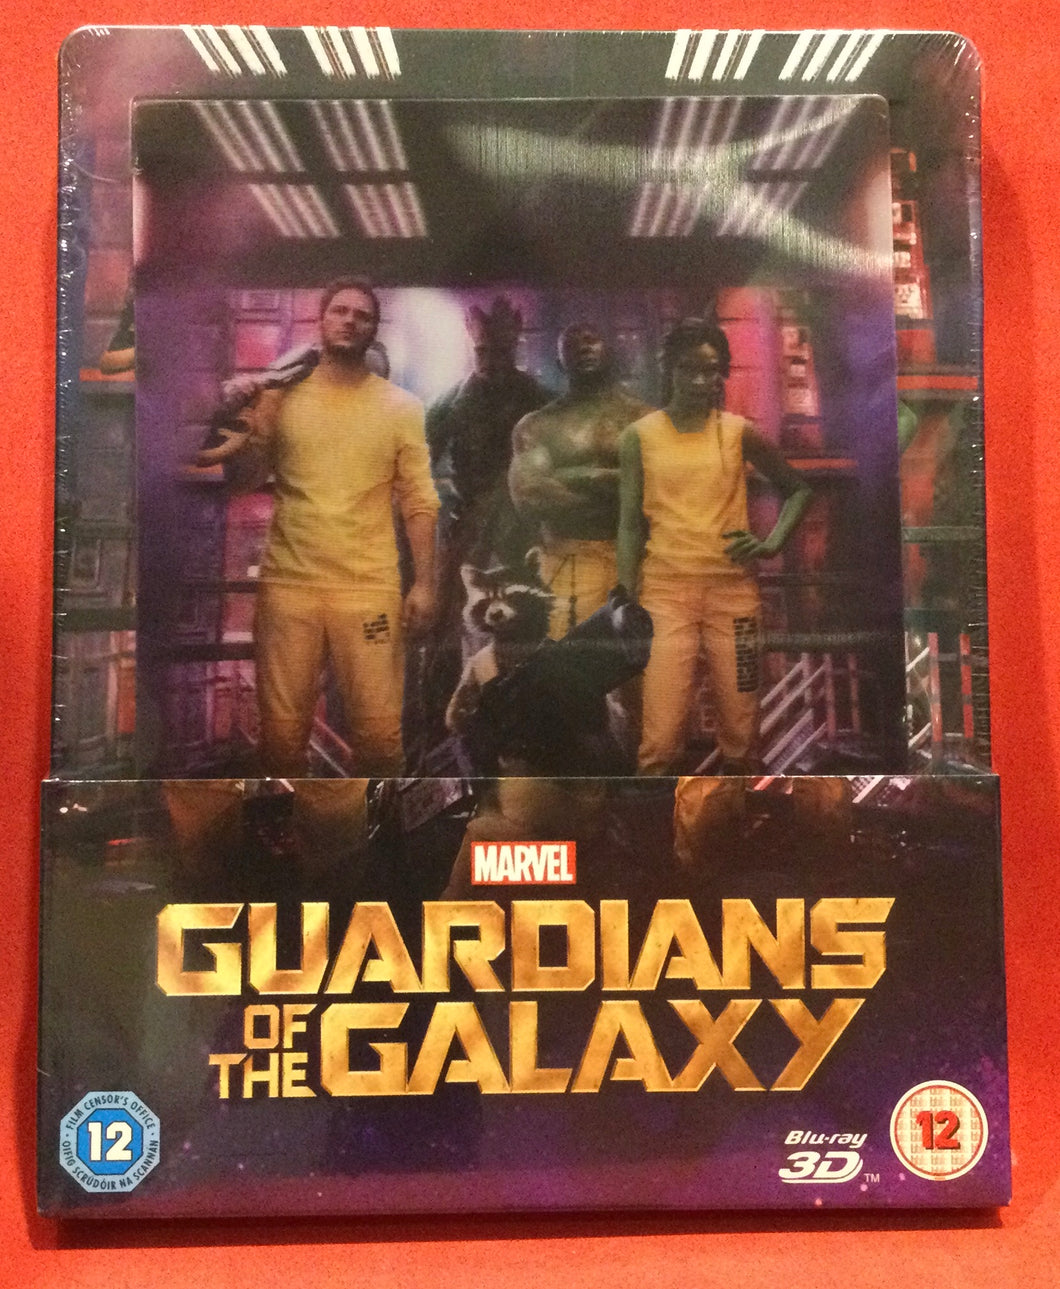 GUARDIANS OF THE GALAXY - BLU-RAY 3D - UK STEELBOOK (SEALED)